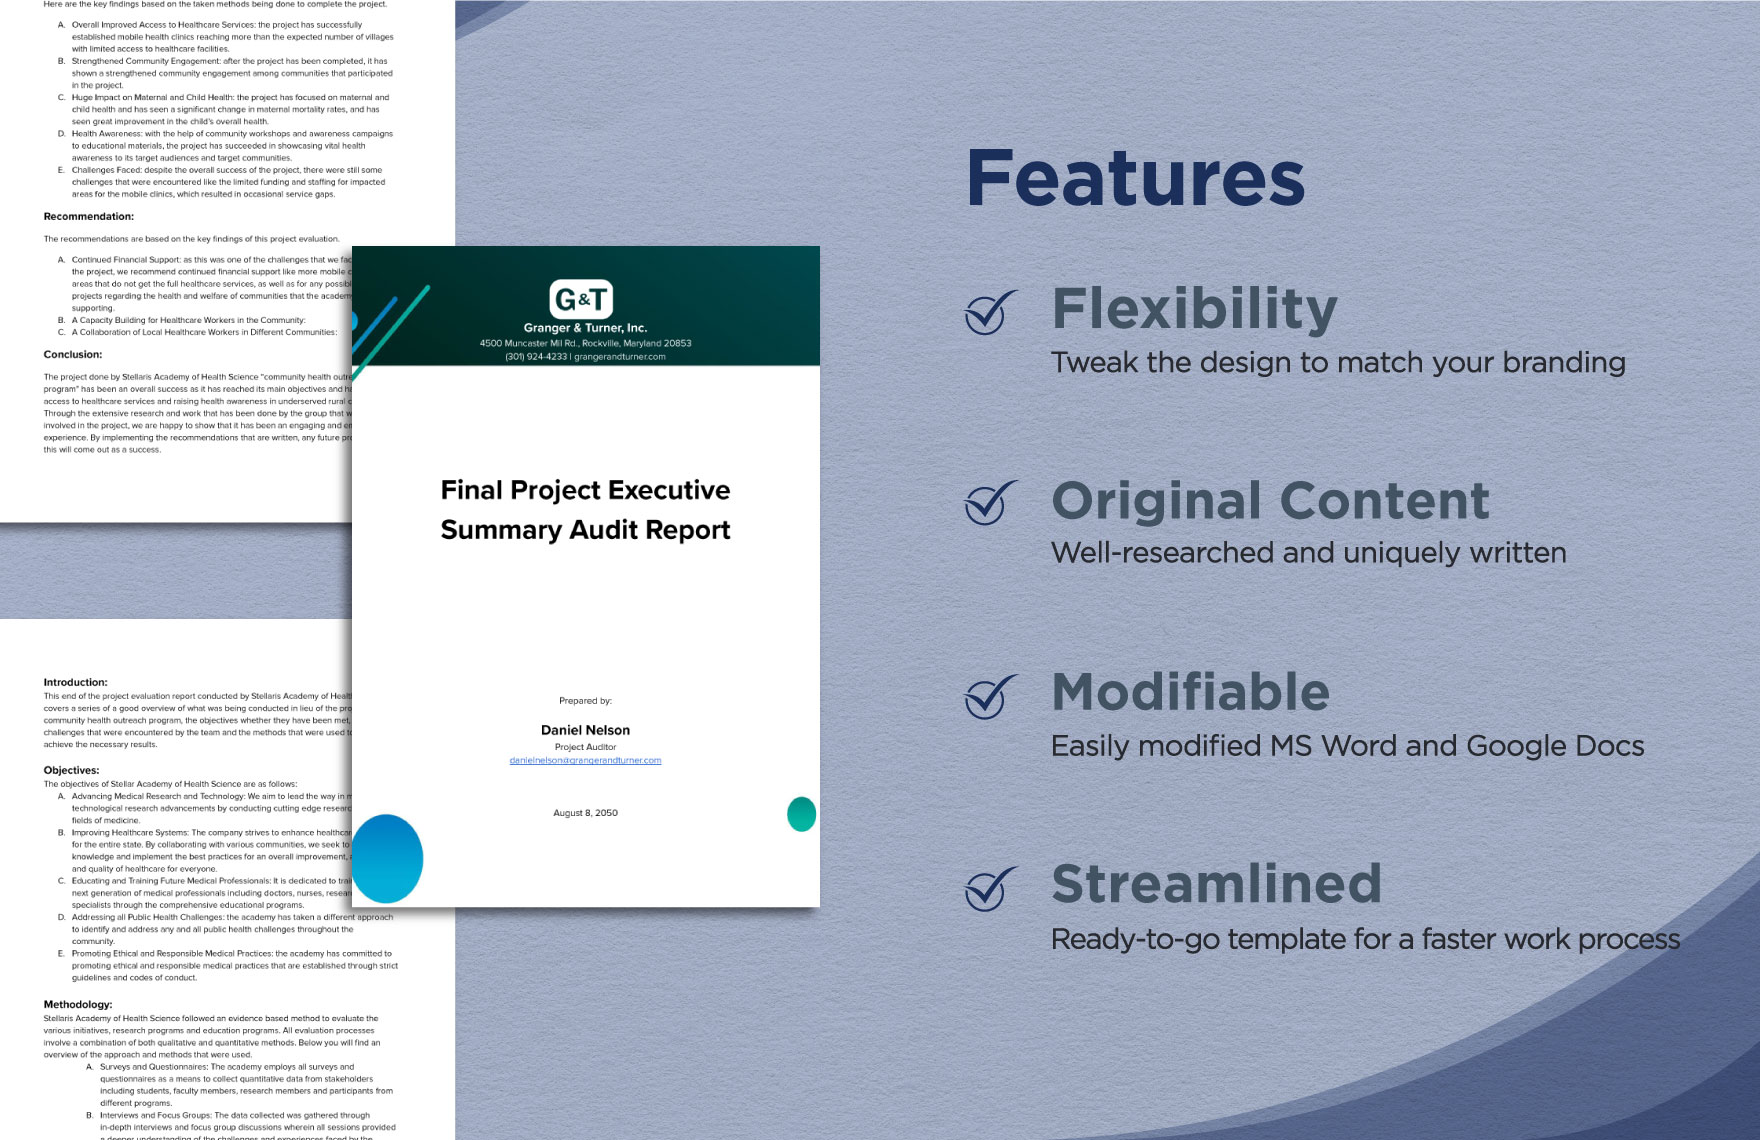 Final Project Executive Summary Audit Report Template